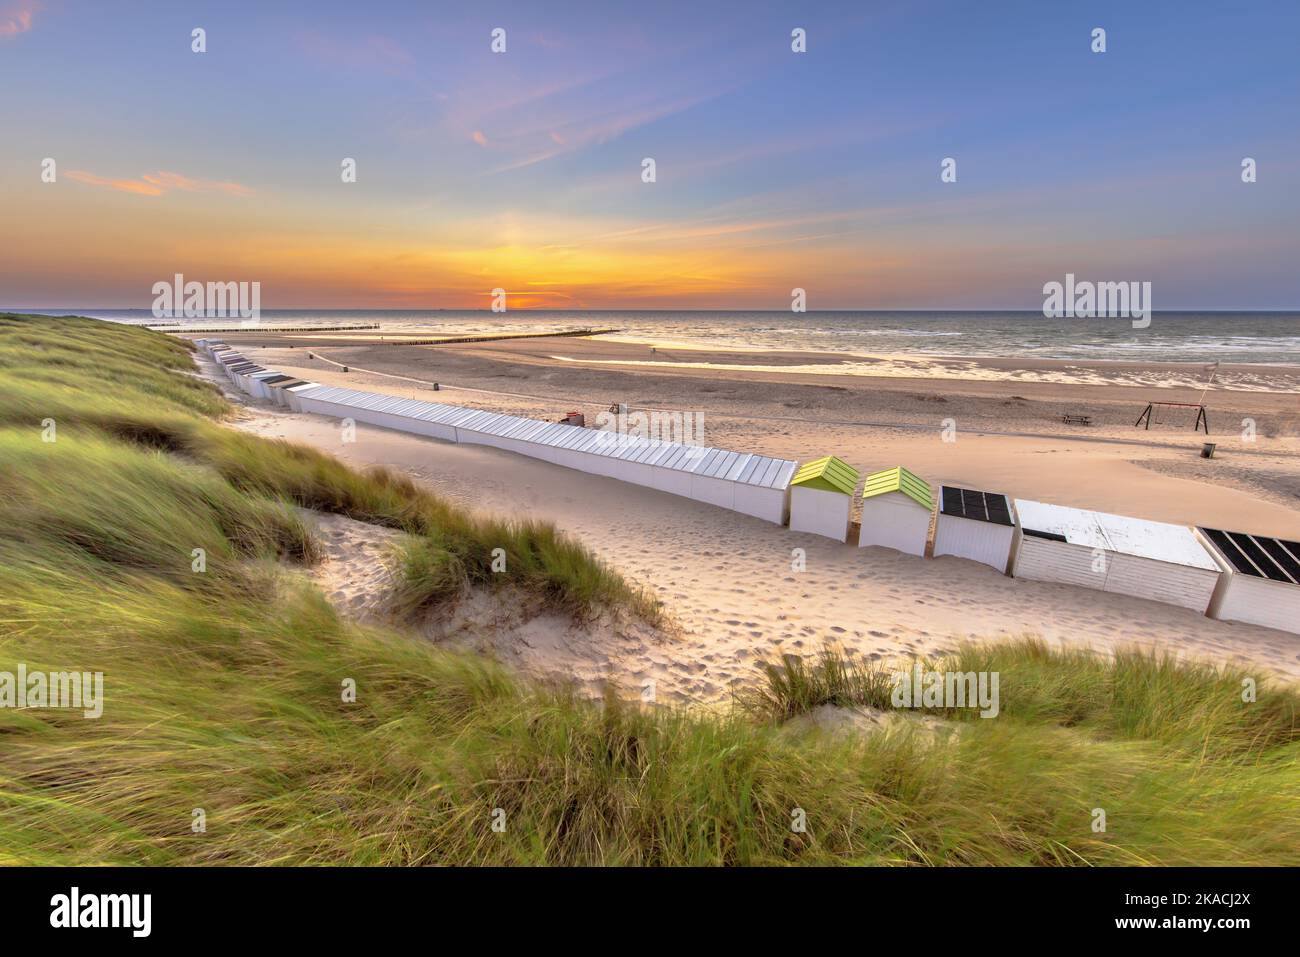 Beach houses on Westkapelle beach seen from the dunes in Zeeland at sunset, Netherlands. Landscape scene of nature in Europe. Stock Photo